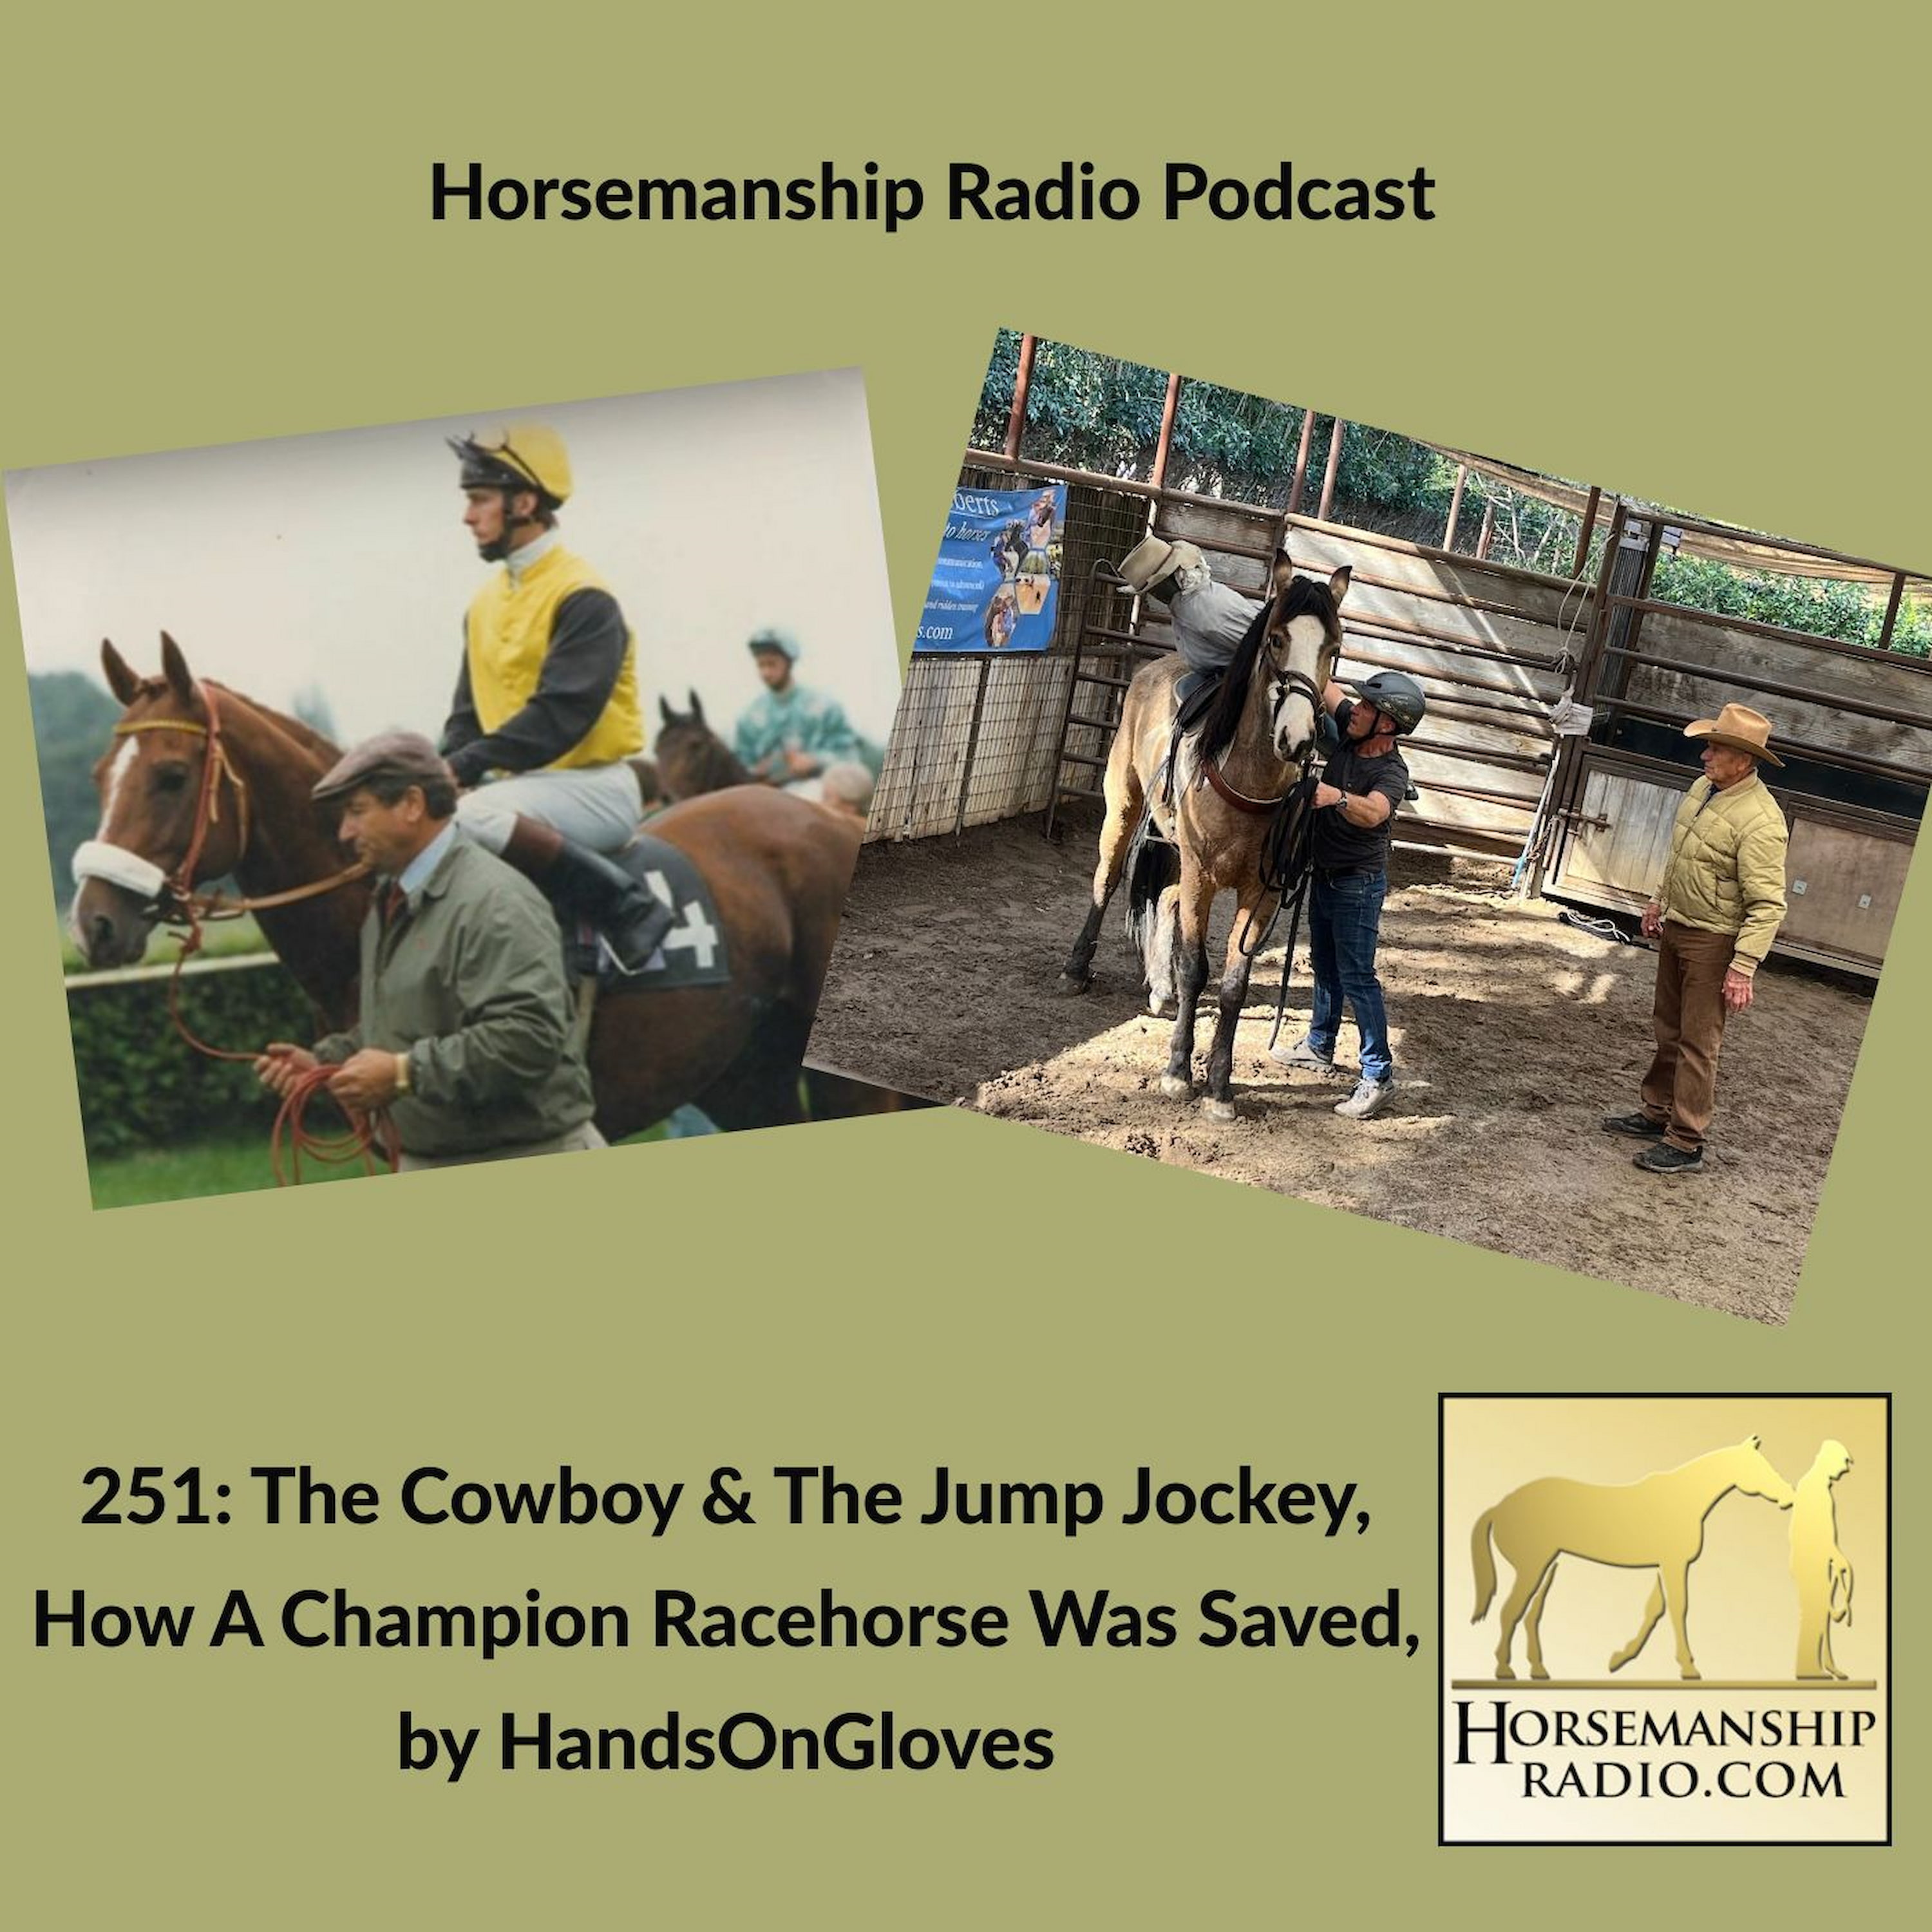 251: The Cowboy & The Jump Jockey, How A Champion Racehorse Was Saved, by HandsOnGloves - Horsemanship Radio